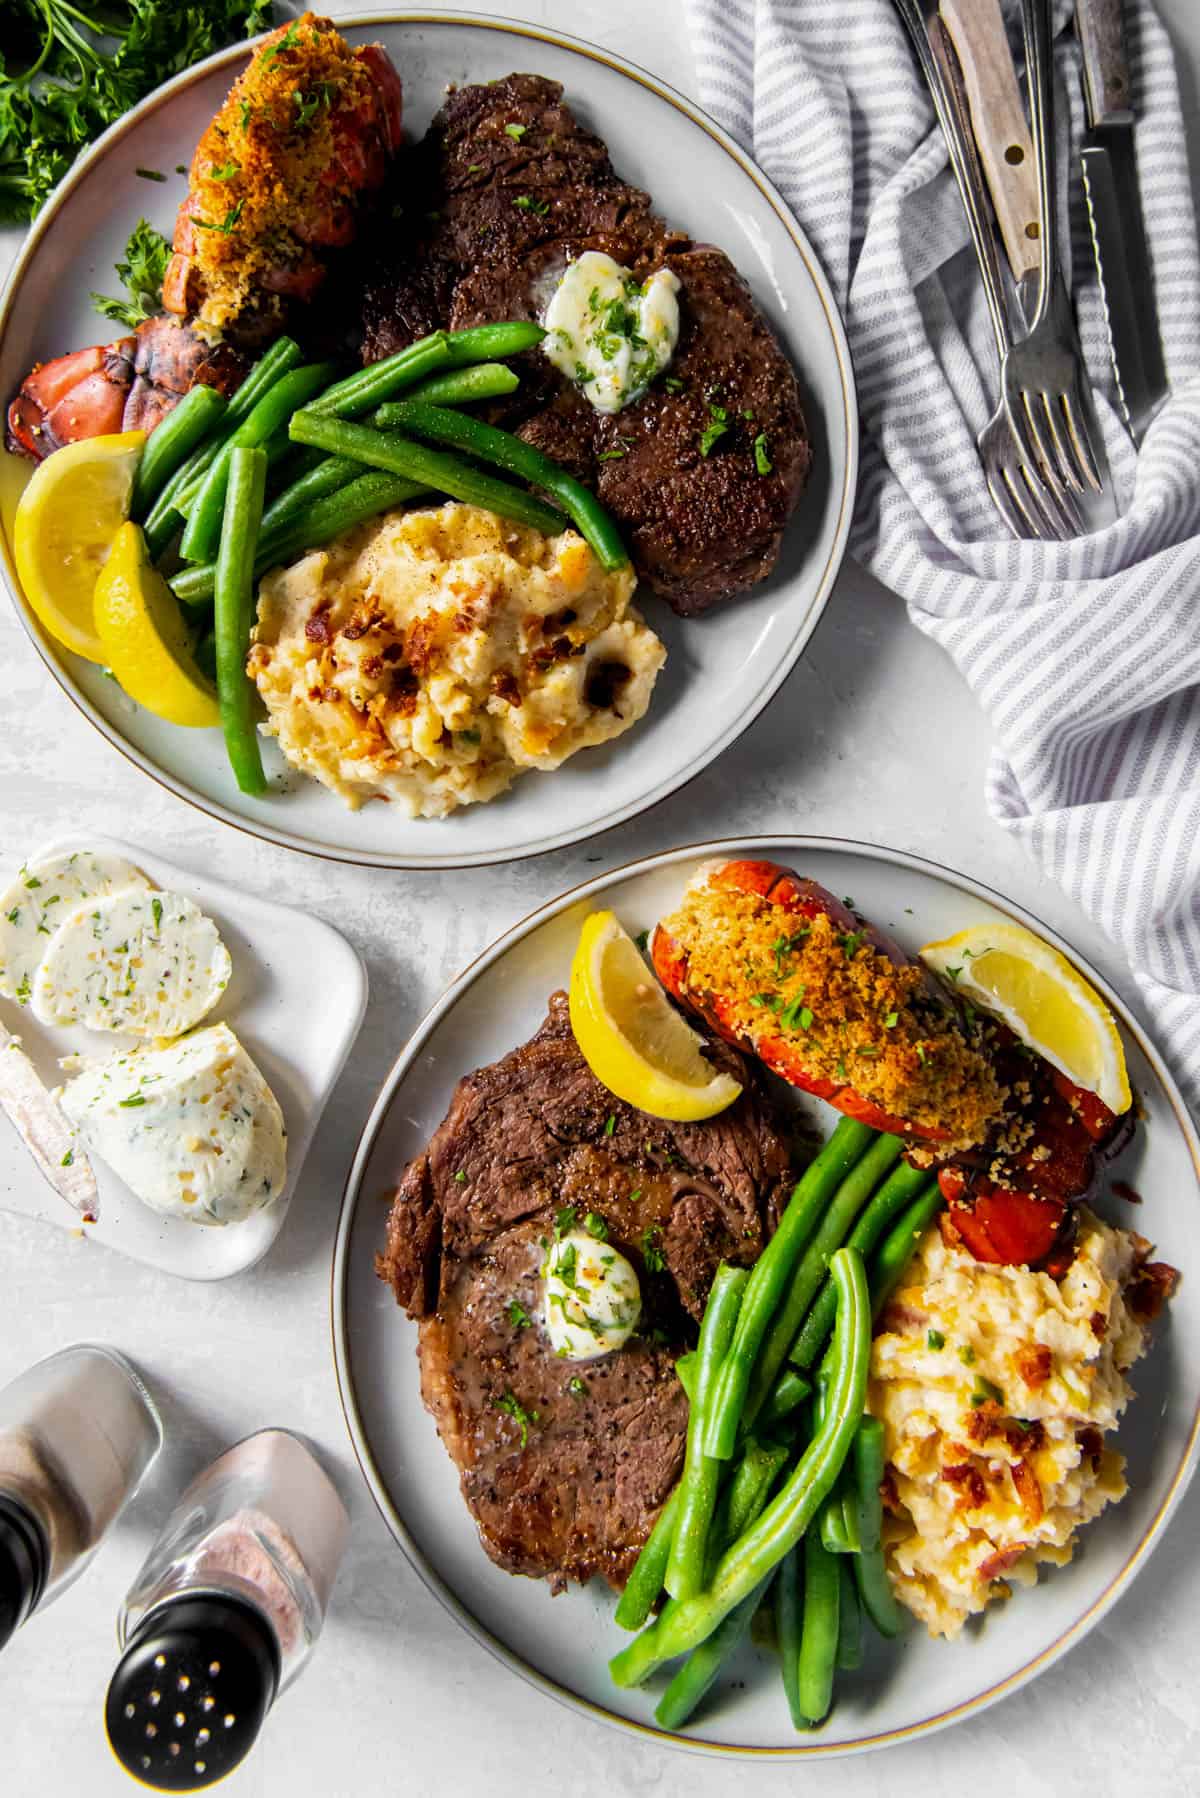 Two plates with cooked lobster and steak, mashed potatoes, green beans and compound herb butter.